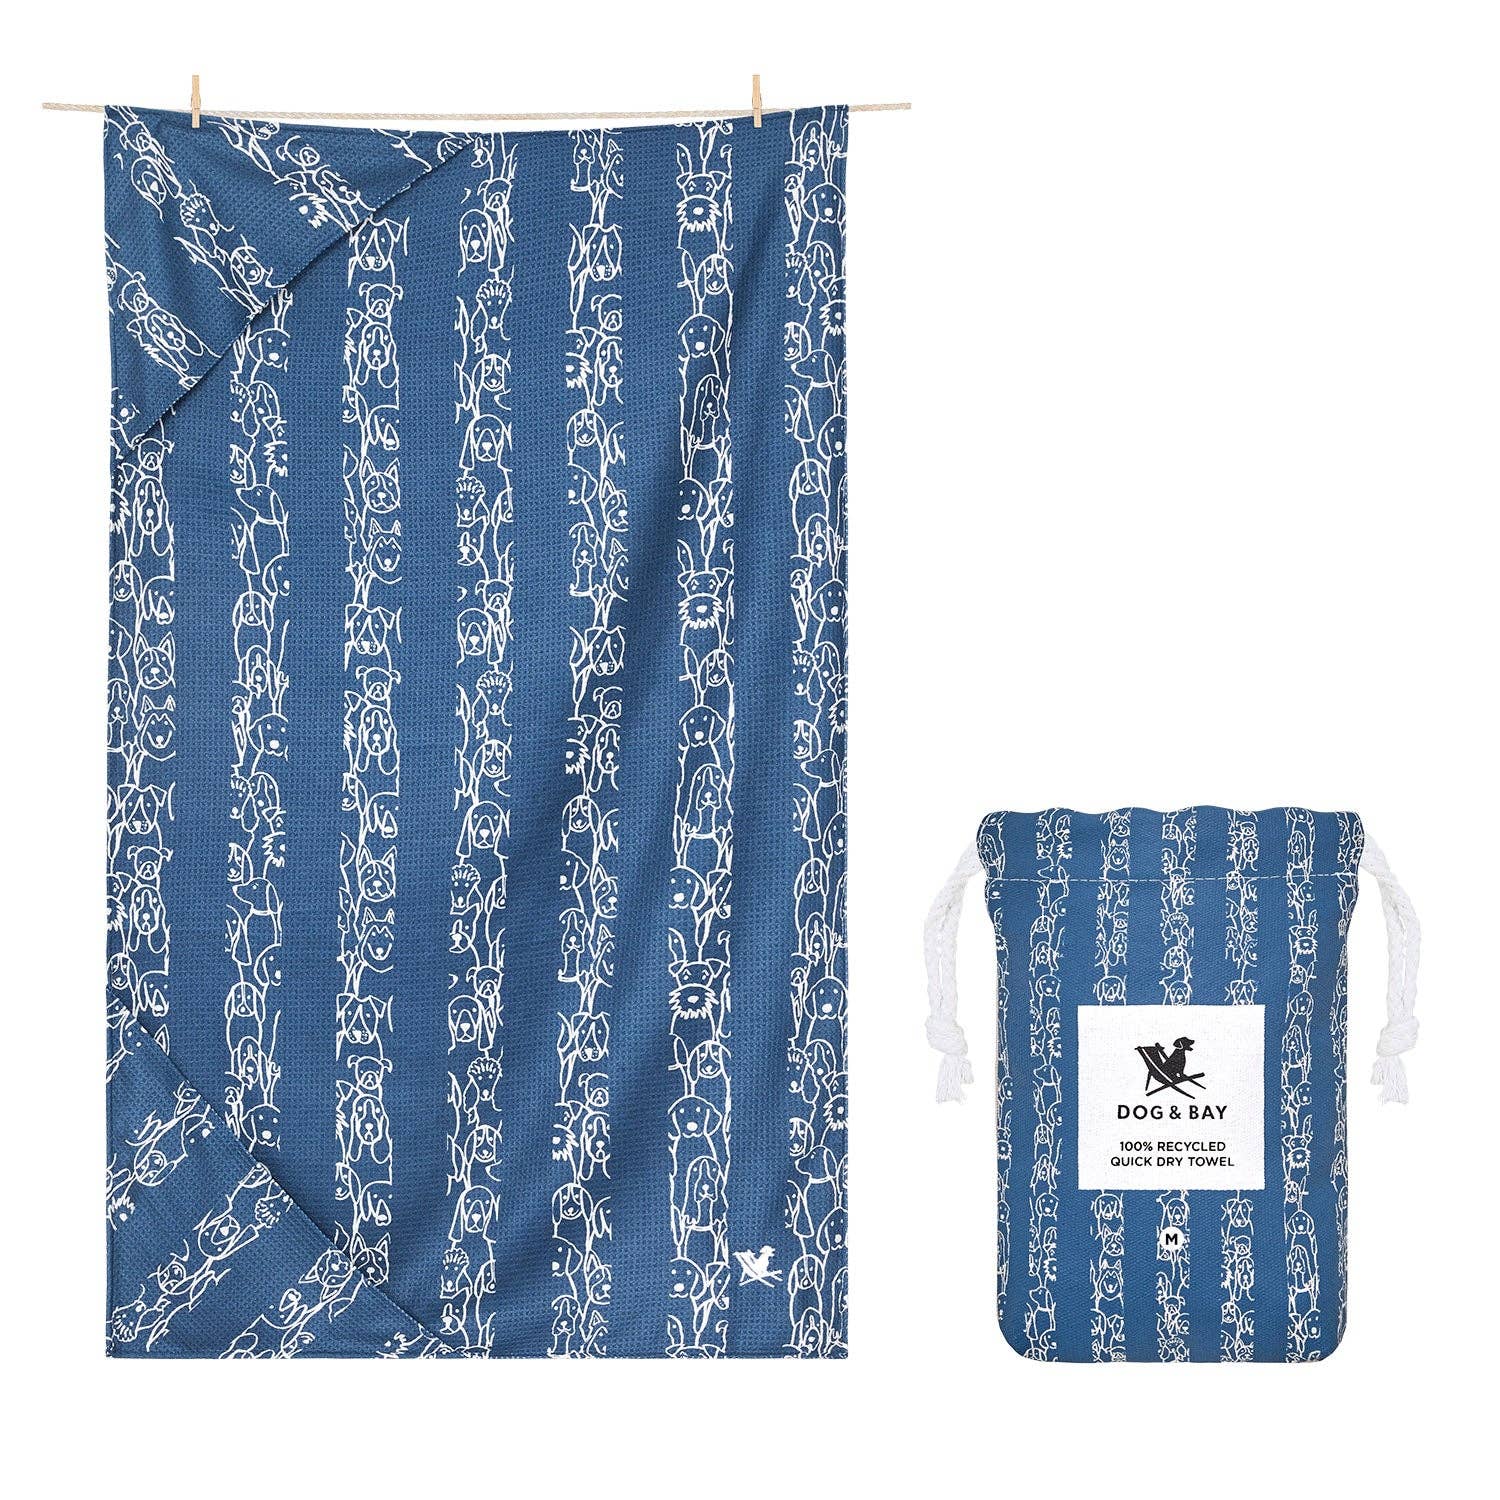 Quick Dry Dog Towel in Puppy Party - 2 sizes - The Preppy Bunny